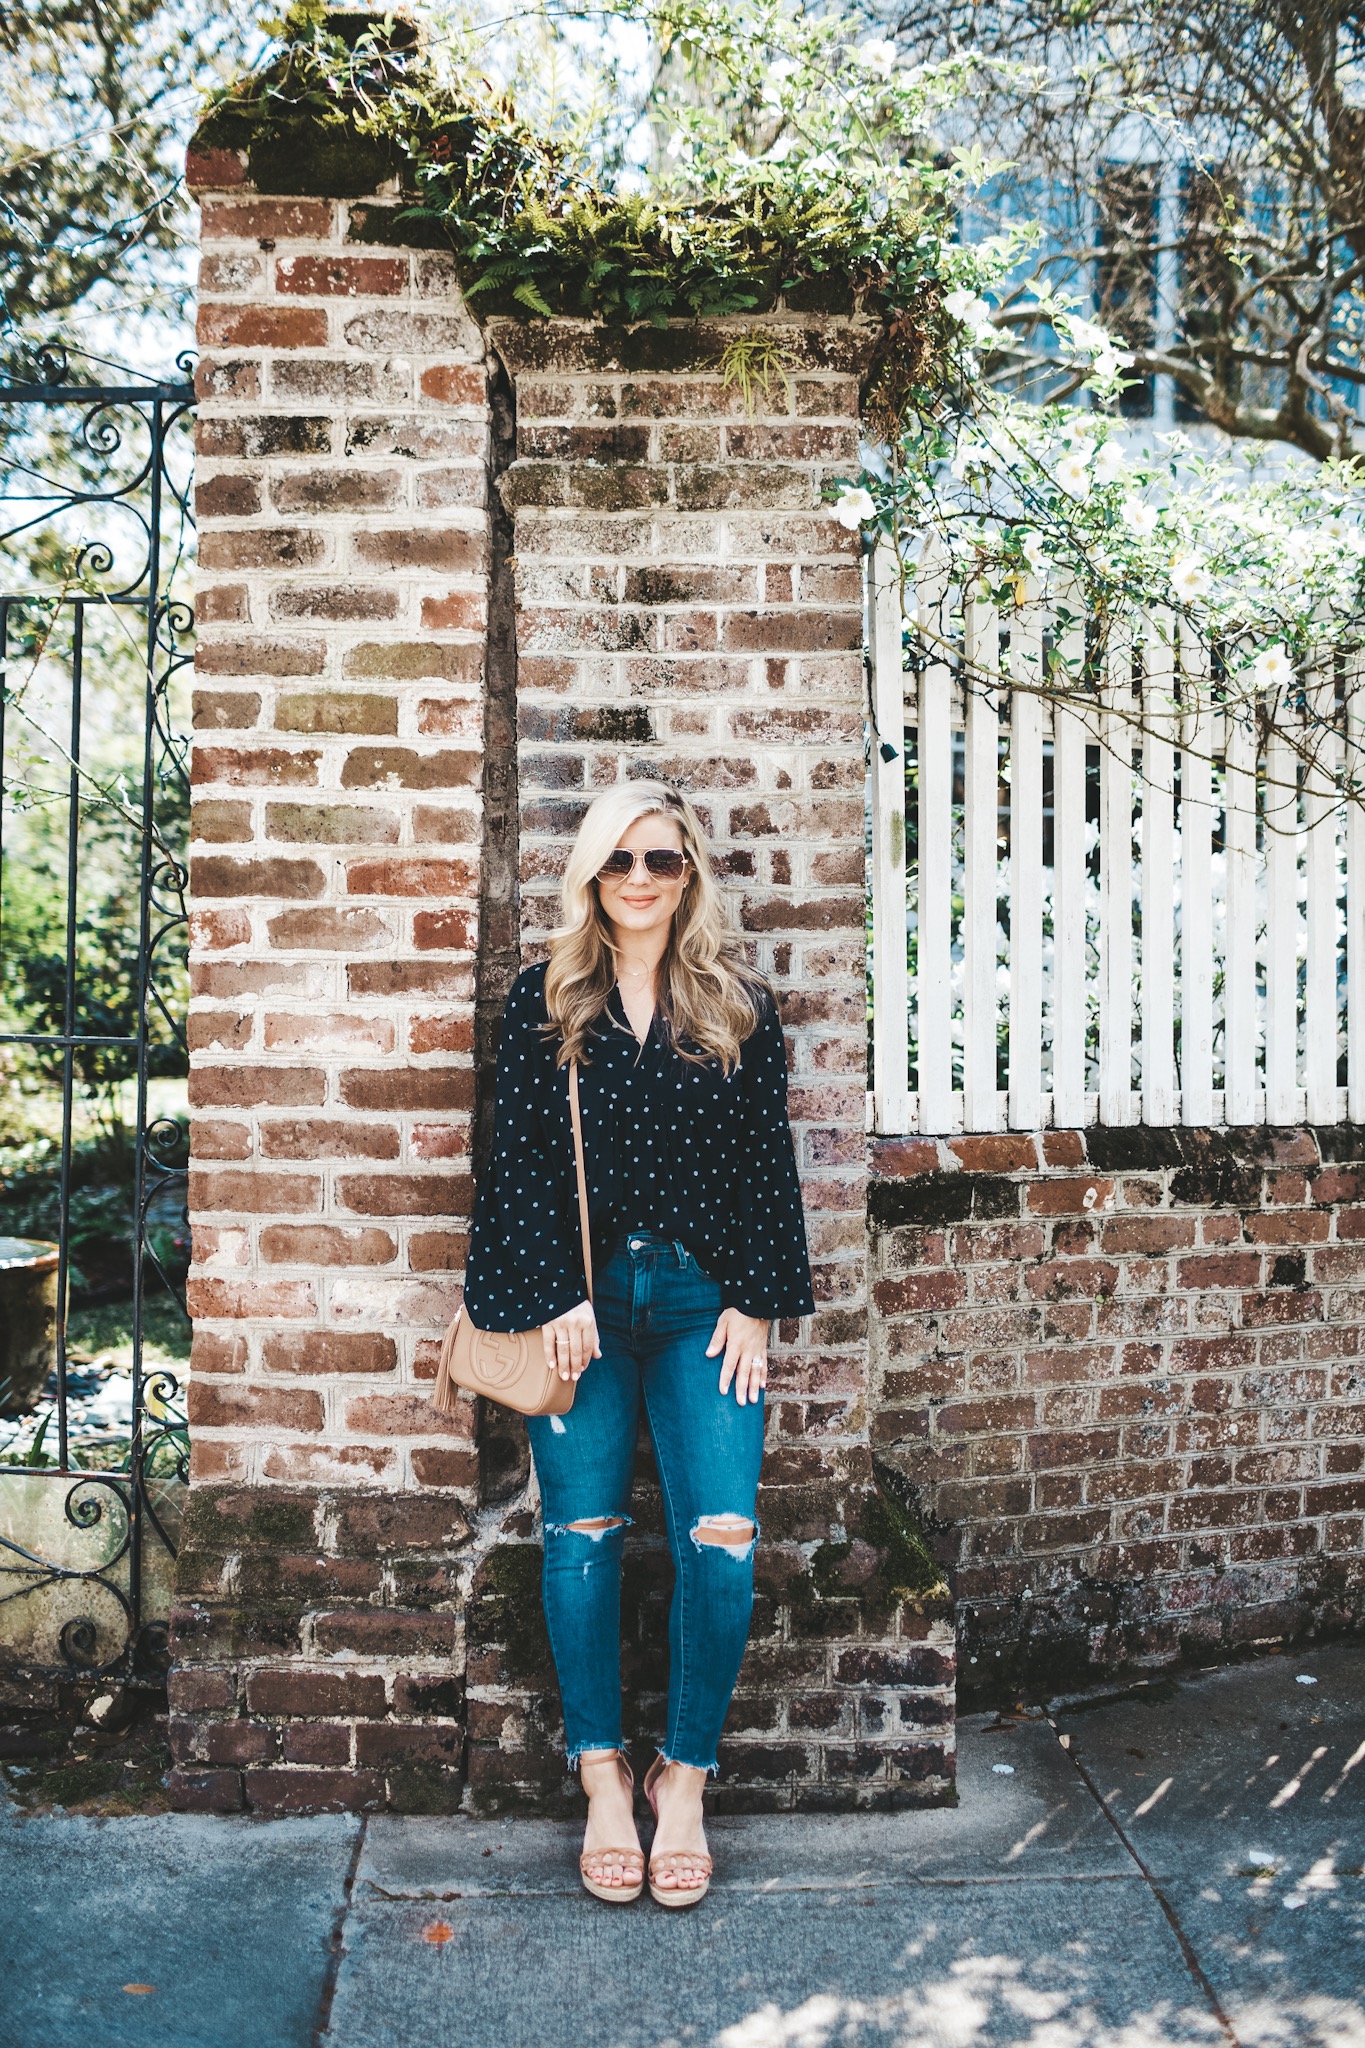 Loft Friends & Family Sale, Navy bell sleeve blouse outfit from SC NC style blogger Cristin Cooper - Friends & Family Loft Sale featured by popular South Carolina fashion blogger The Southern Style Guide